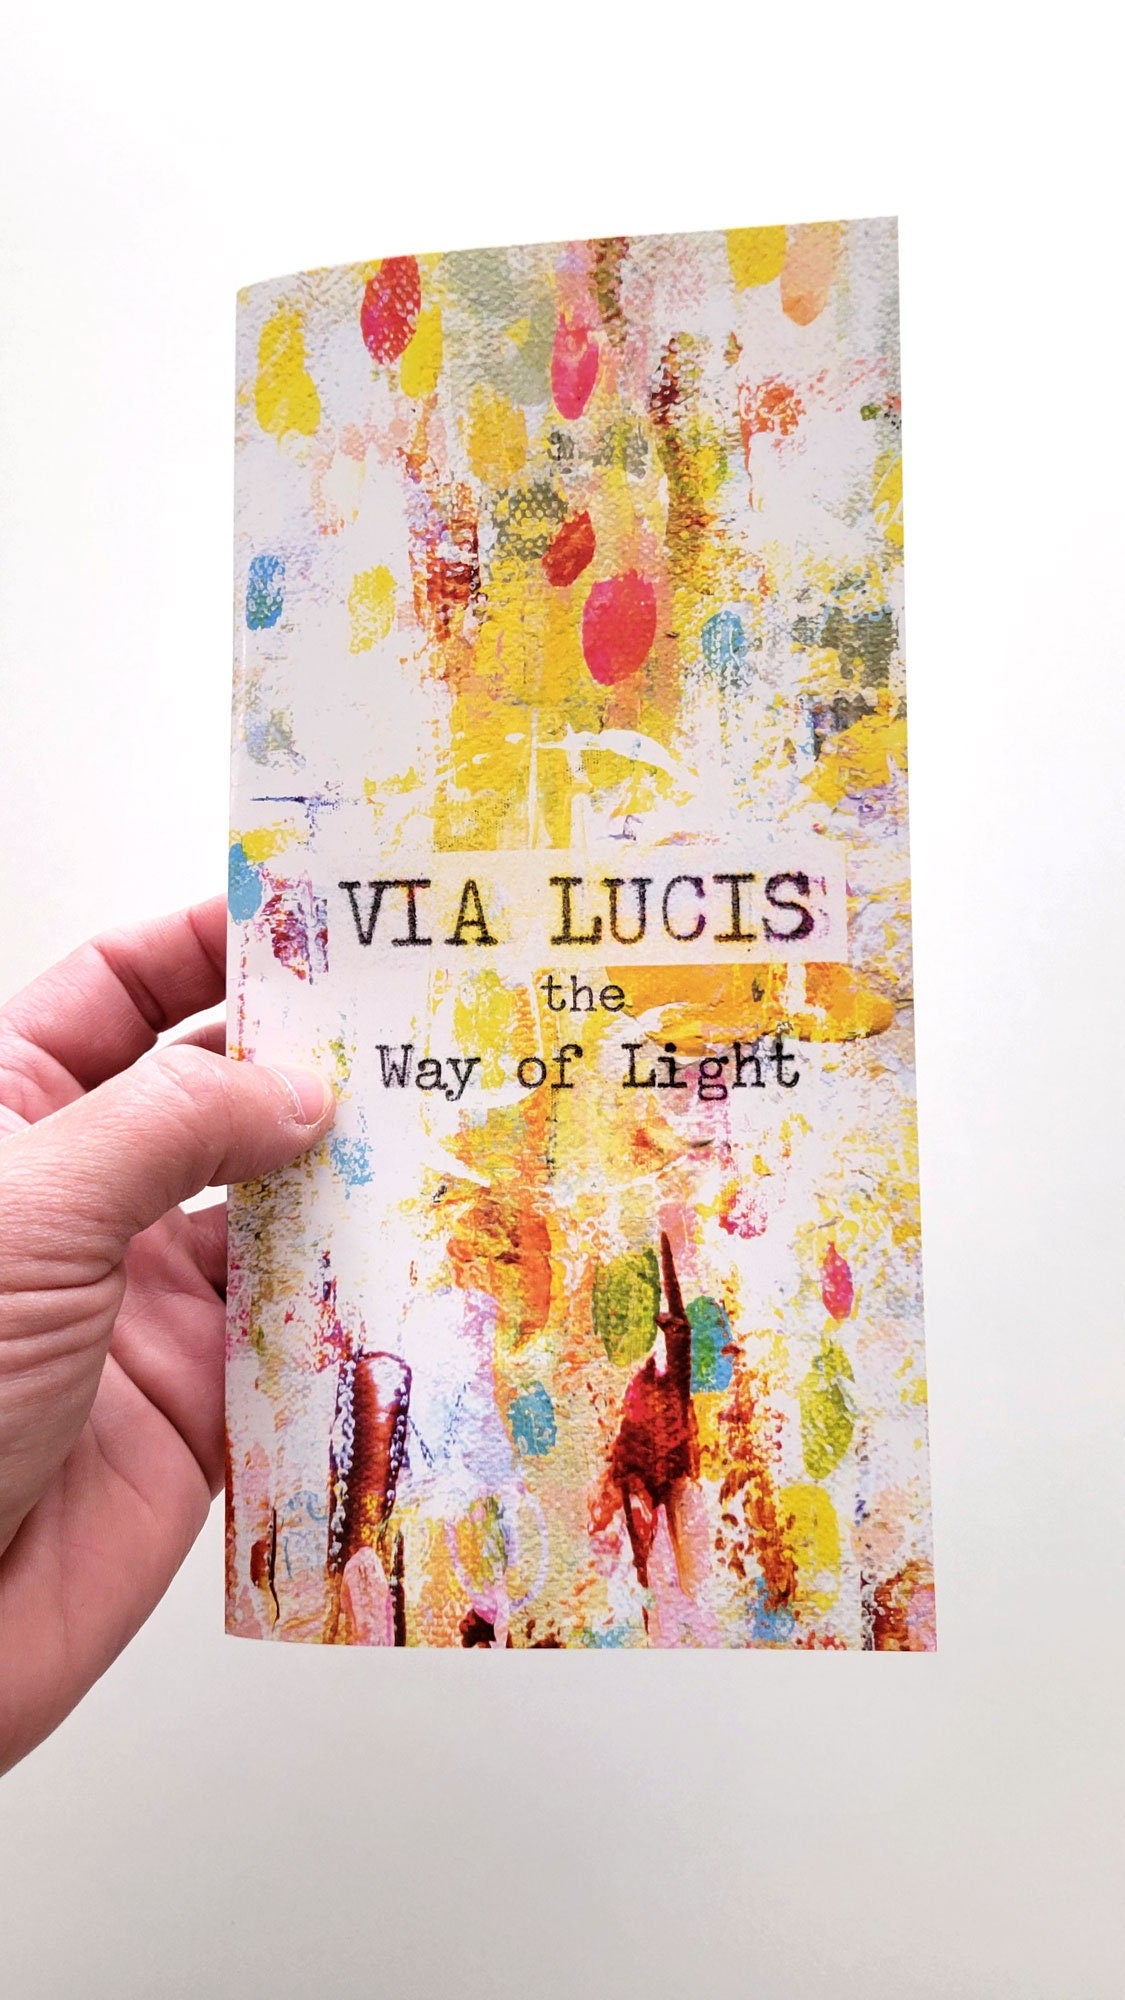 The Way of Light - Via Lucis, devotional booklet